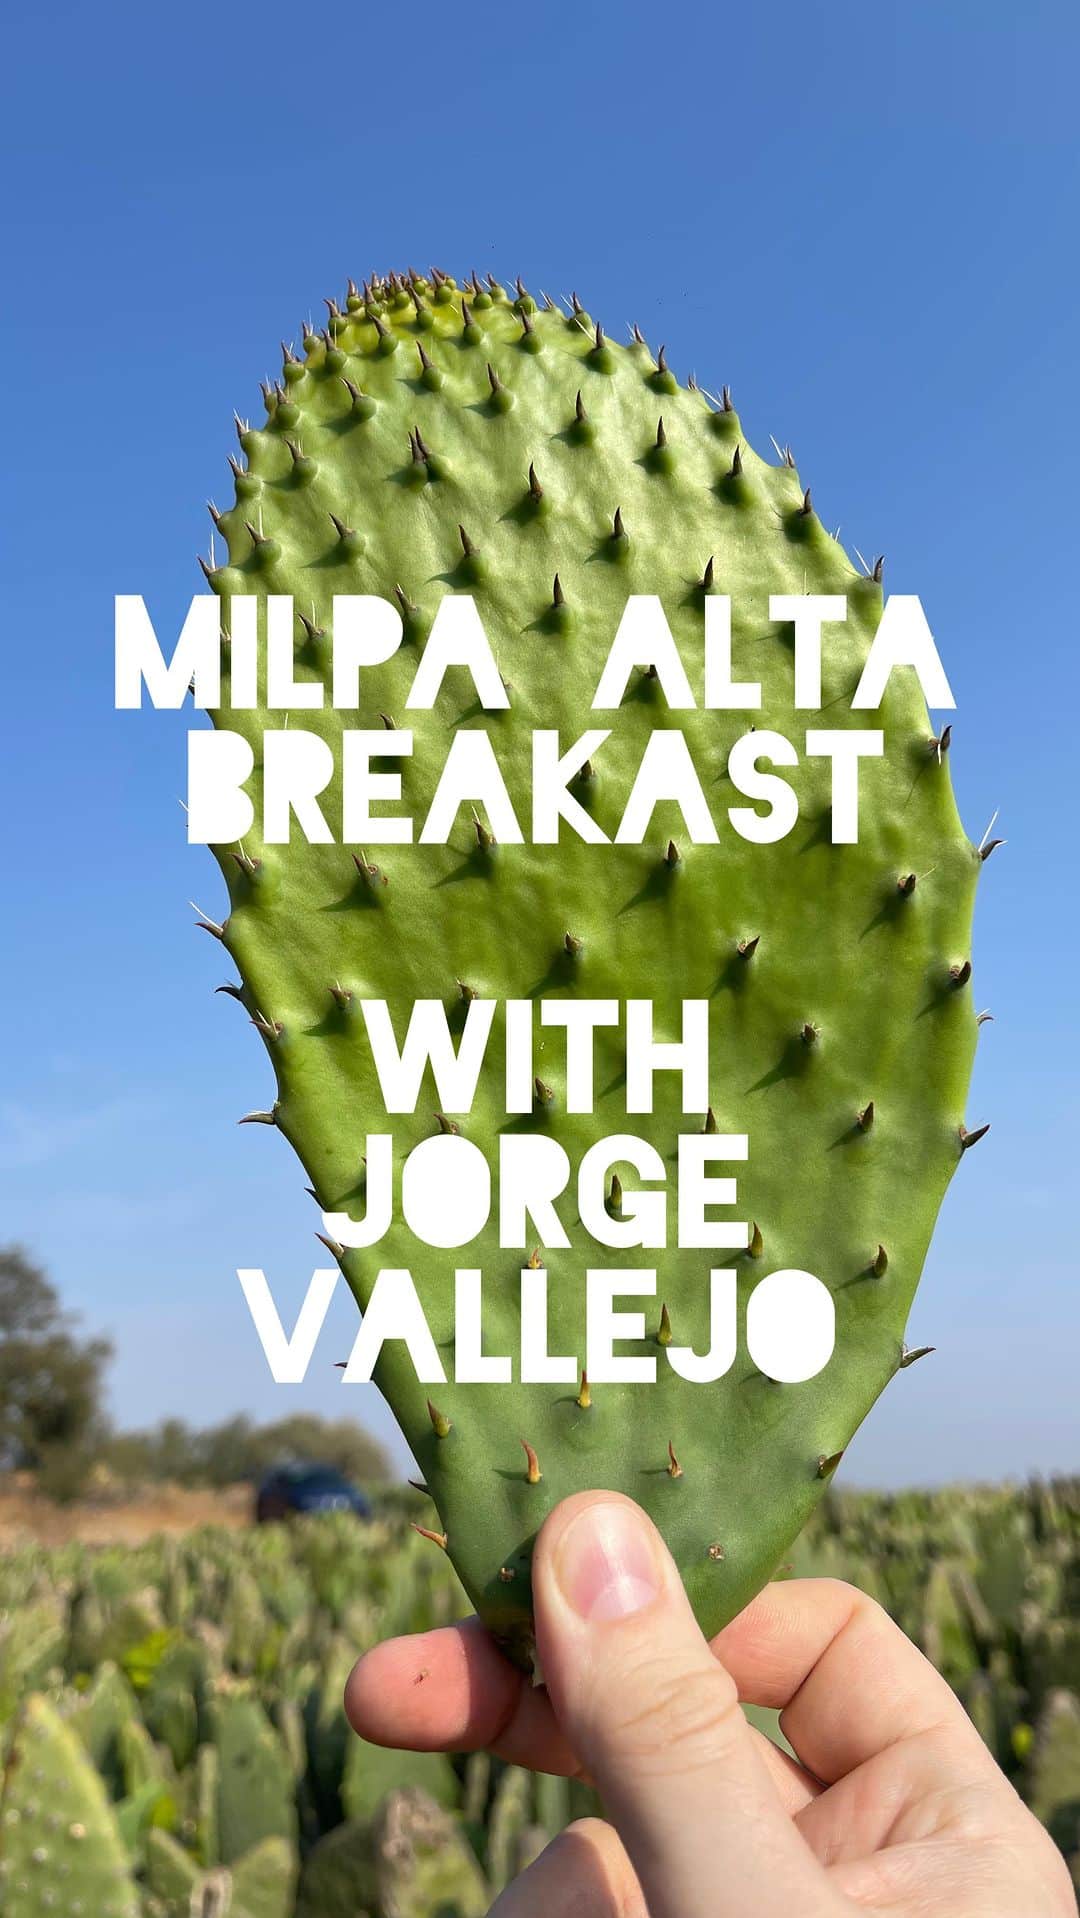 Symmetry Breakfastのインスタグラム：「Milpa Alta produces a fifth of the nopales consumed in Mexico. Earlier this year we went to Mercado De Acopio De Nopal with @jorgevallejo from @rest_quintonil (currently number 9 on Worlds 50 Best restaurants) to find out more how nopales are grown, harvested and consumed. On the farm of @rutadelamilpa they made us tricolour corn tortillas using a technique I’d never seen before, where the masa is scraped across a cloth through a window and we ate tacos of nopales and beef. The cactus plant is incredible, it grows fast in the rich volcanic soils of the region and is often dubbed a superfood for its impressive nutritional values #symmetrybreakfast」